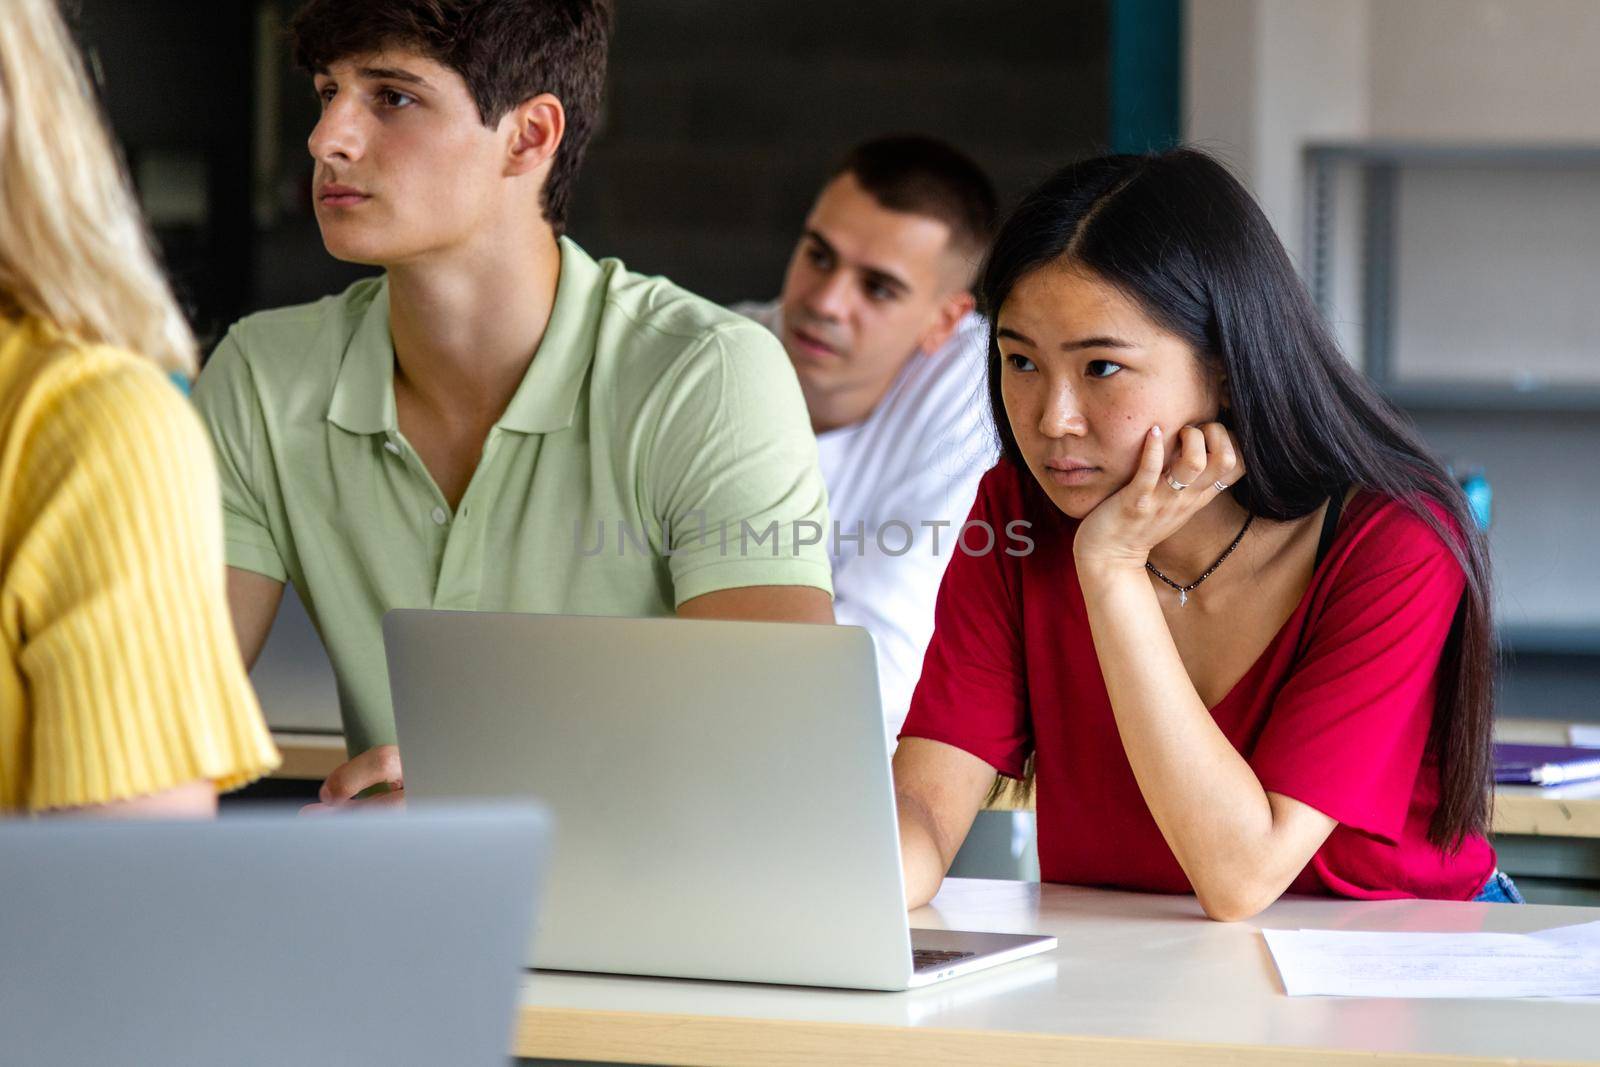 Asian female teen college student in class listening to lecture using laptop to take notes. Education concept. Back to school.